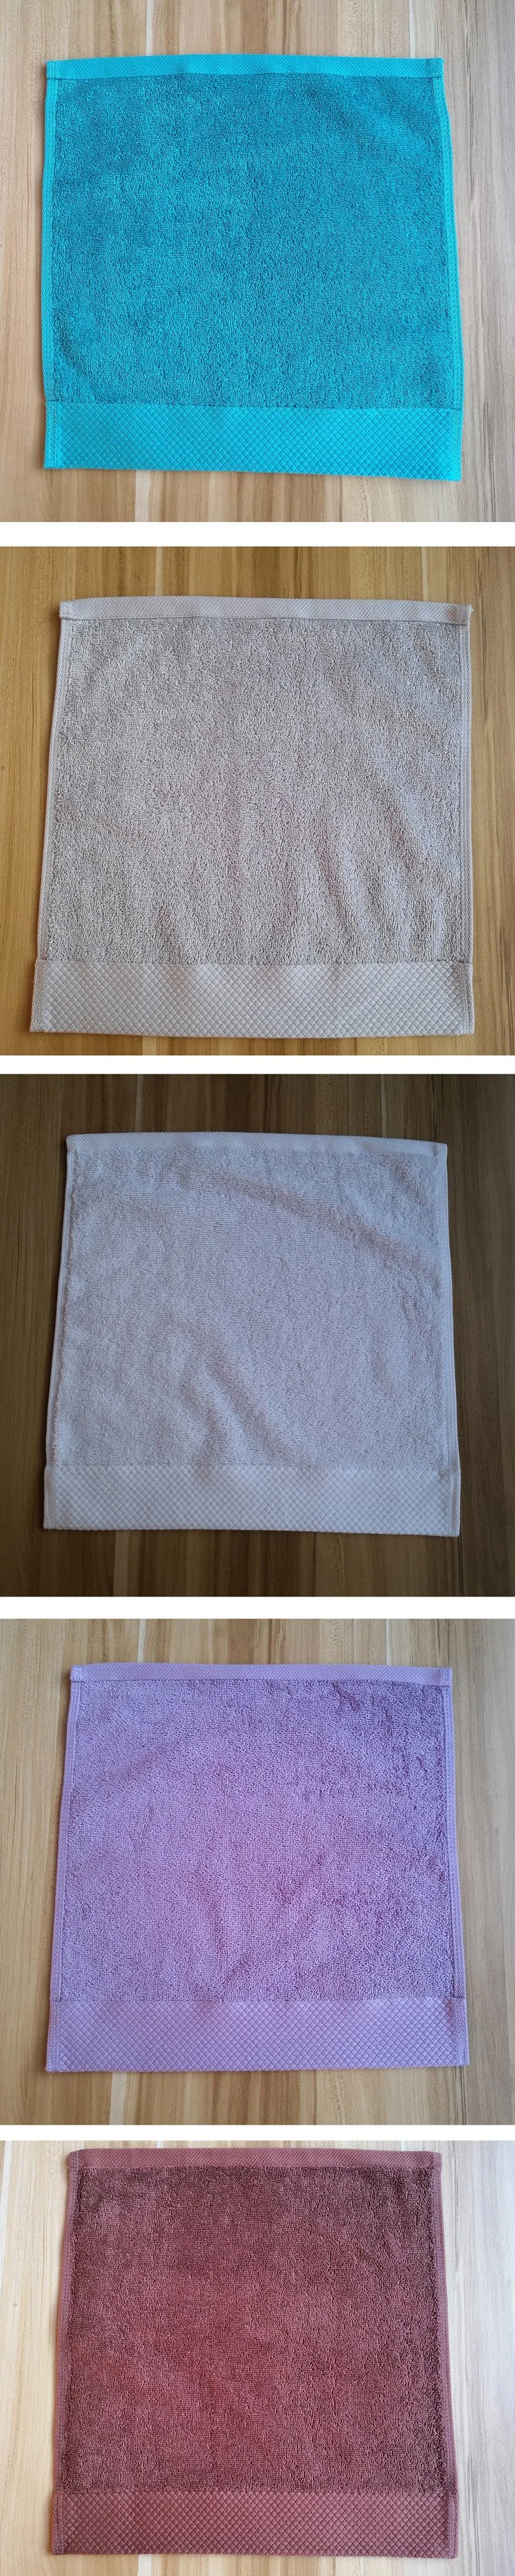 Soft Antibacterial 33X33cm Organic Pure Cotton 100% Face Towel with Logo